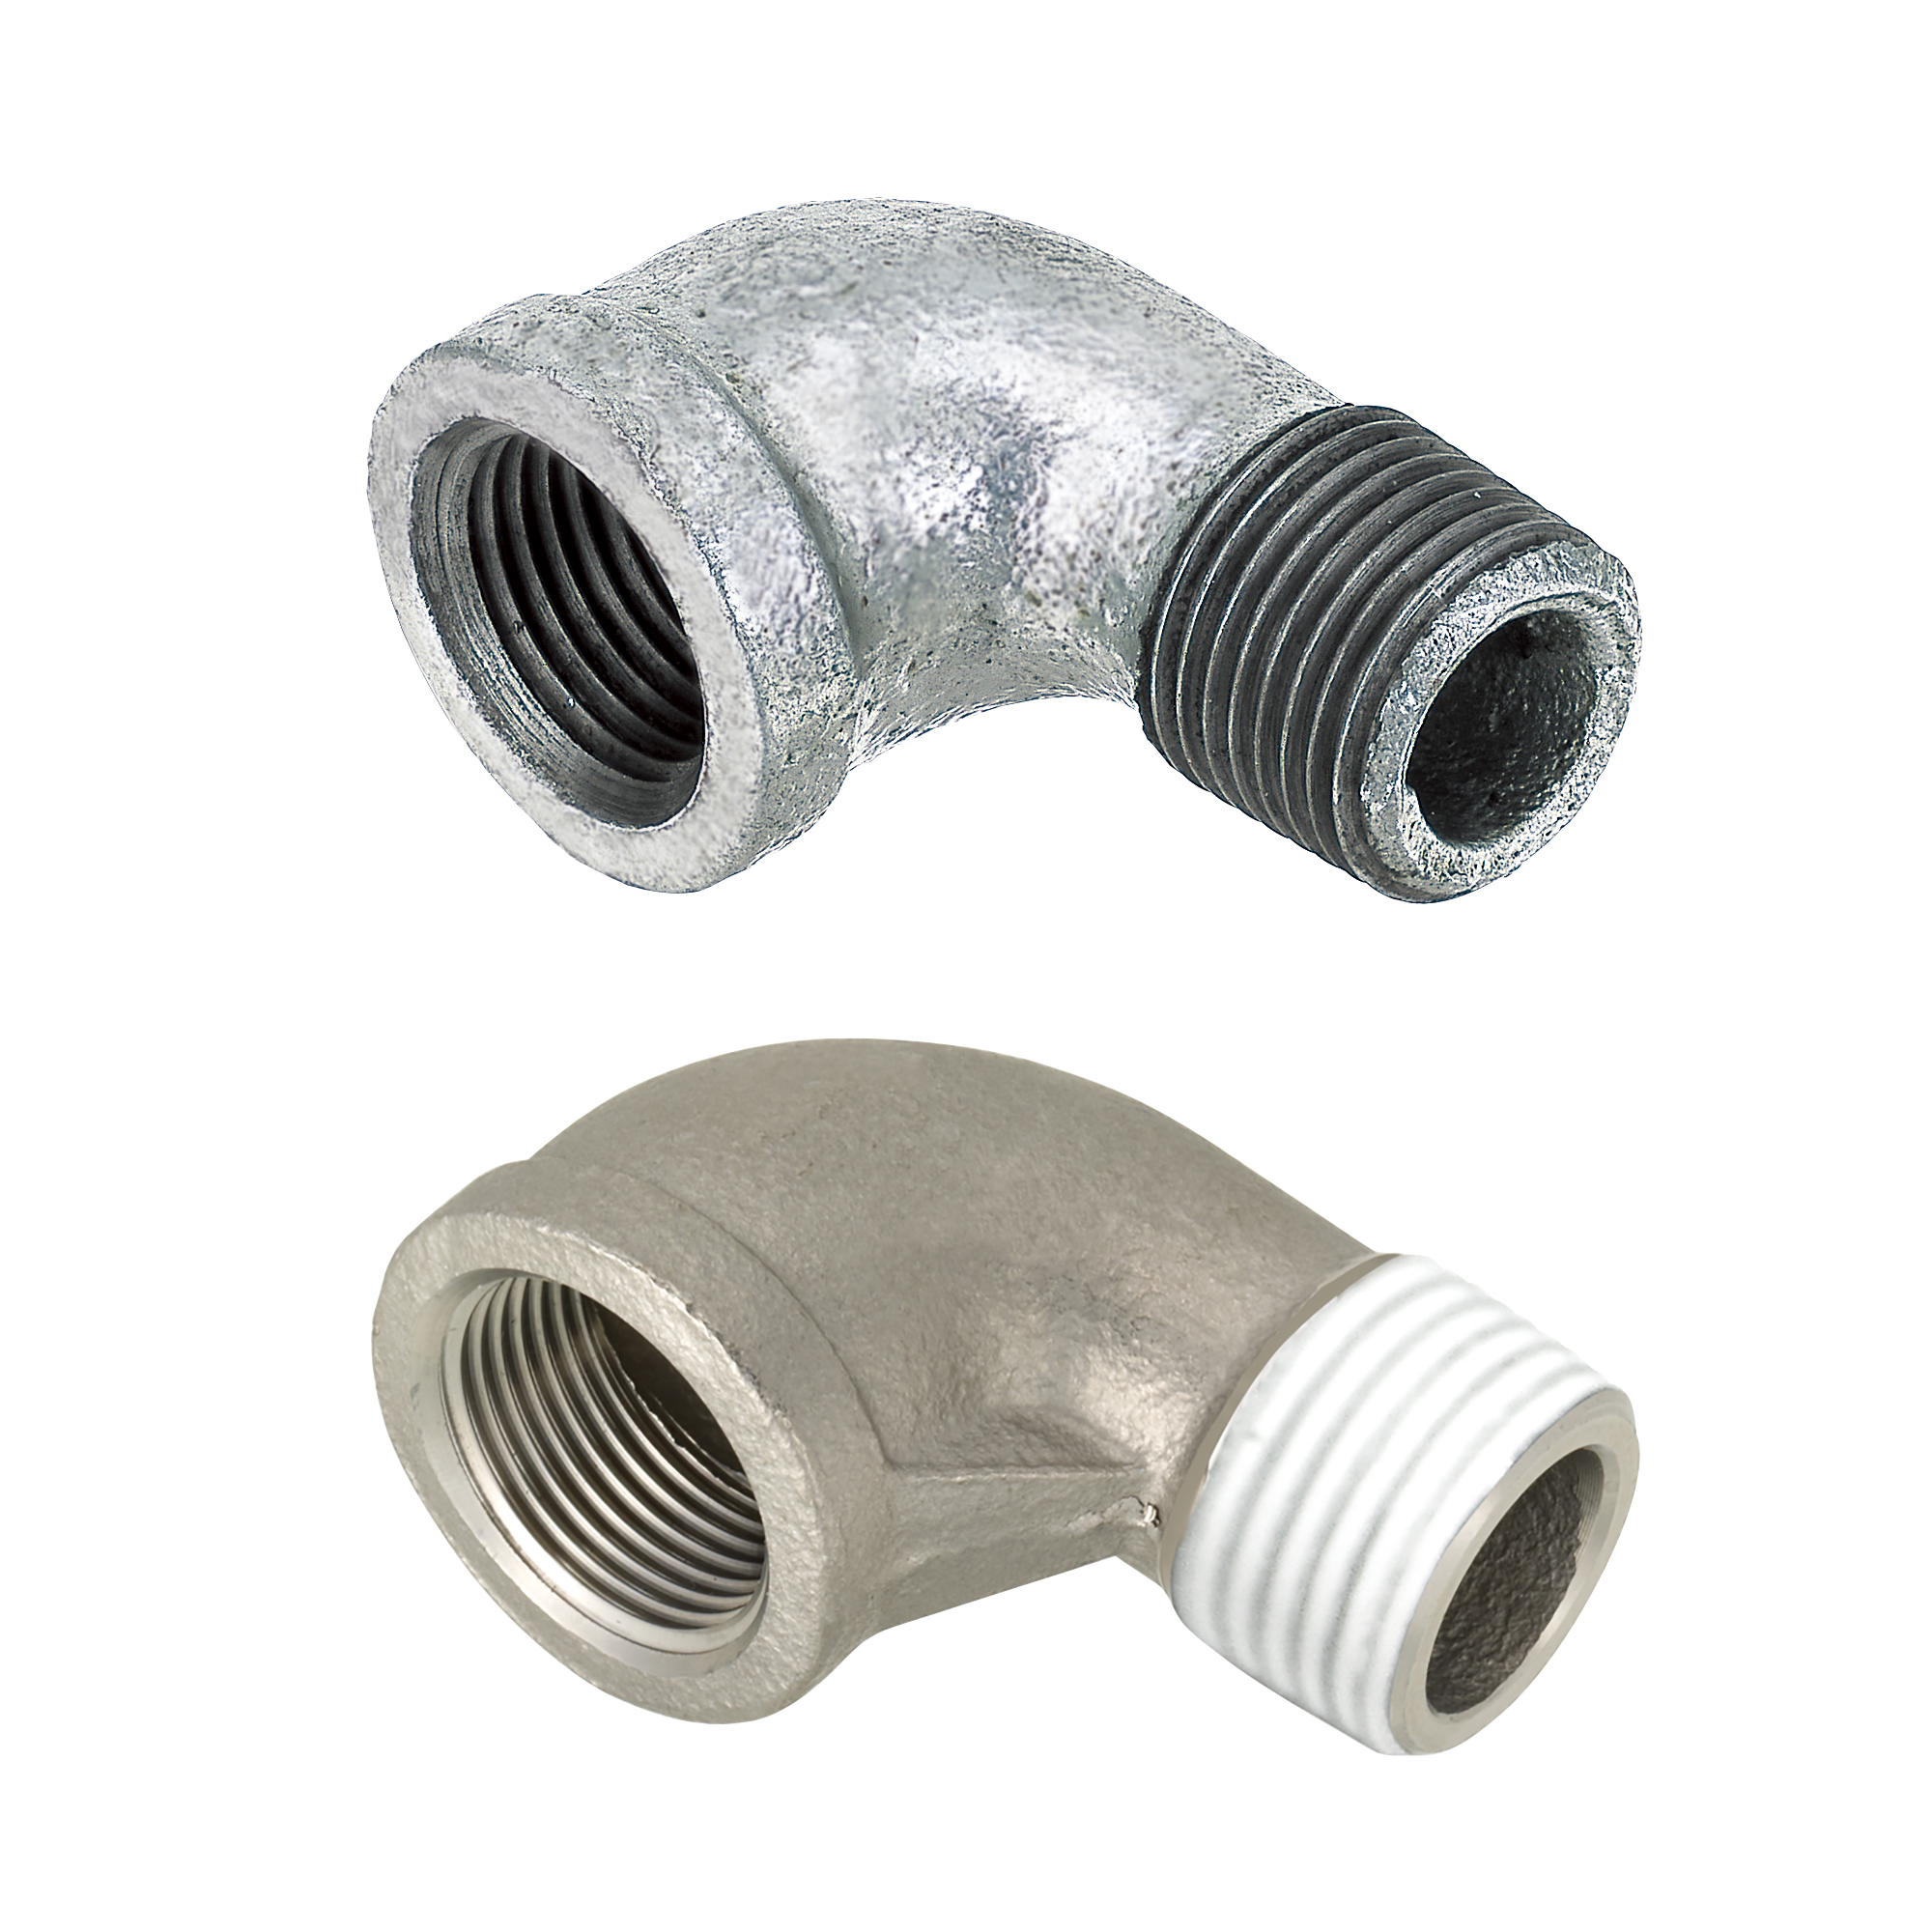 Pipe Fitting - 90° Elbow Adapter, Male to Female, Threaded and Tapped, Low Pressure